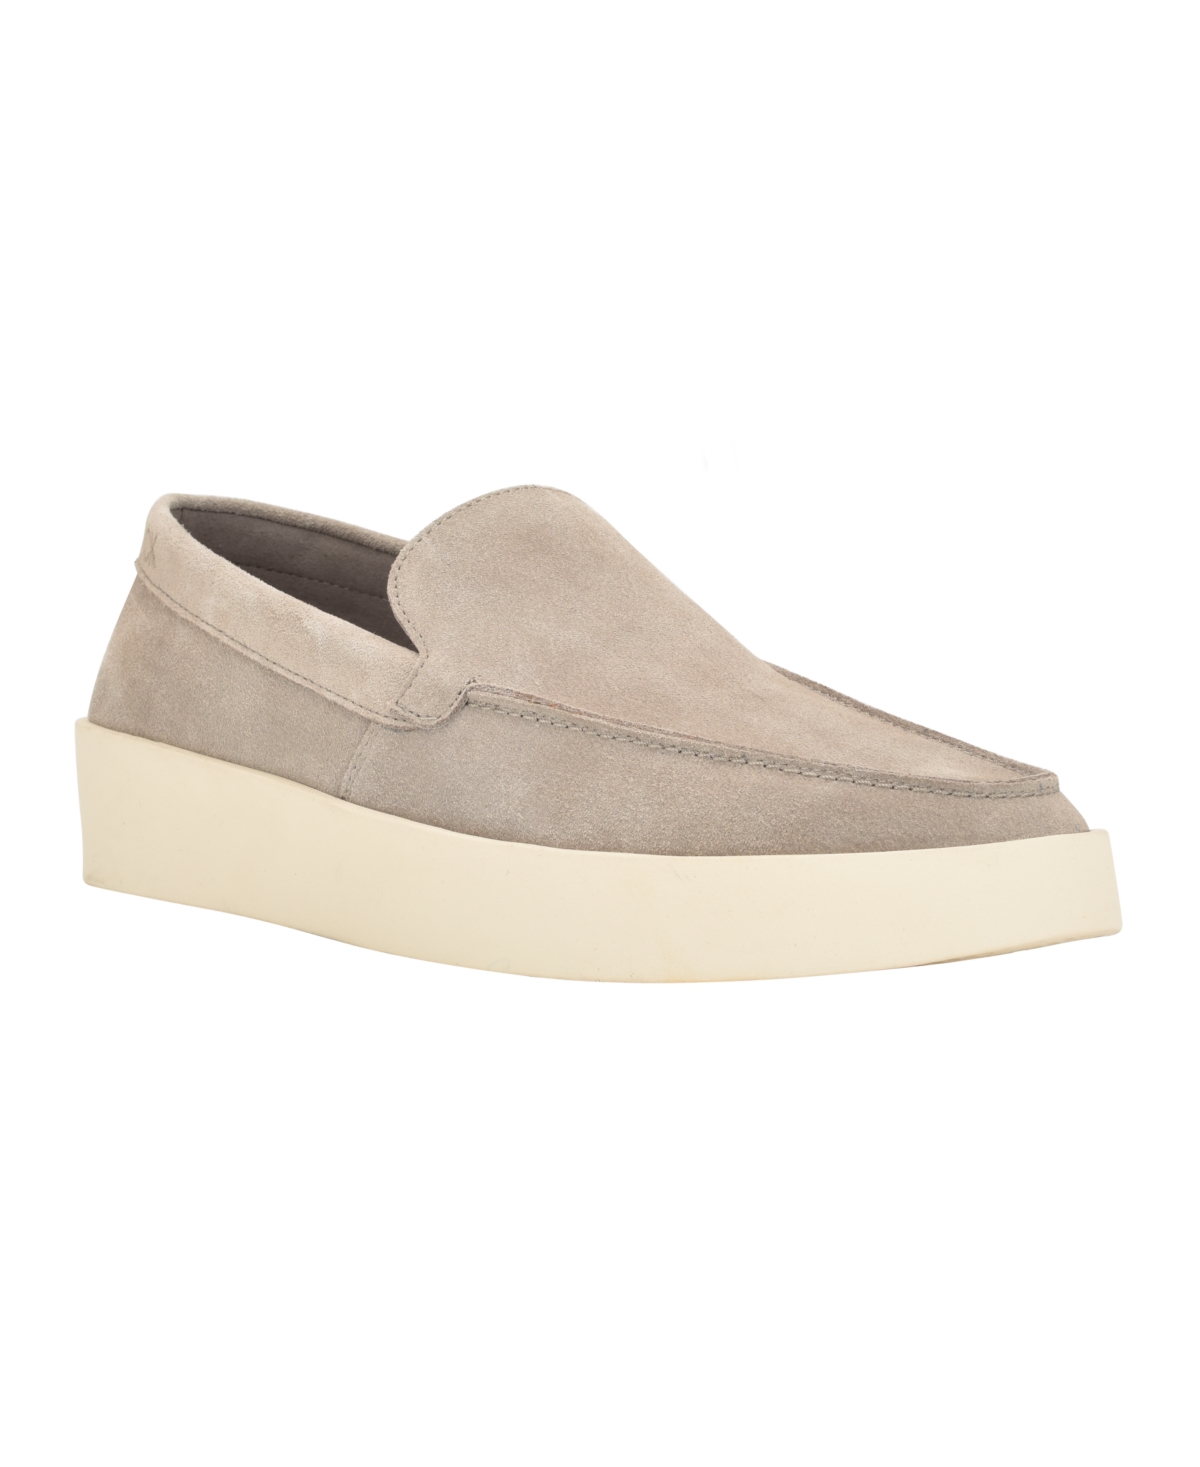 Calvin Klein Men's Carch Casual Slip-on Loafers In Light Gray Suede